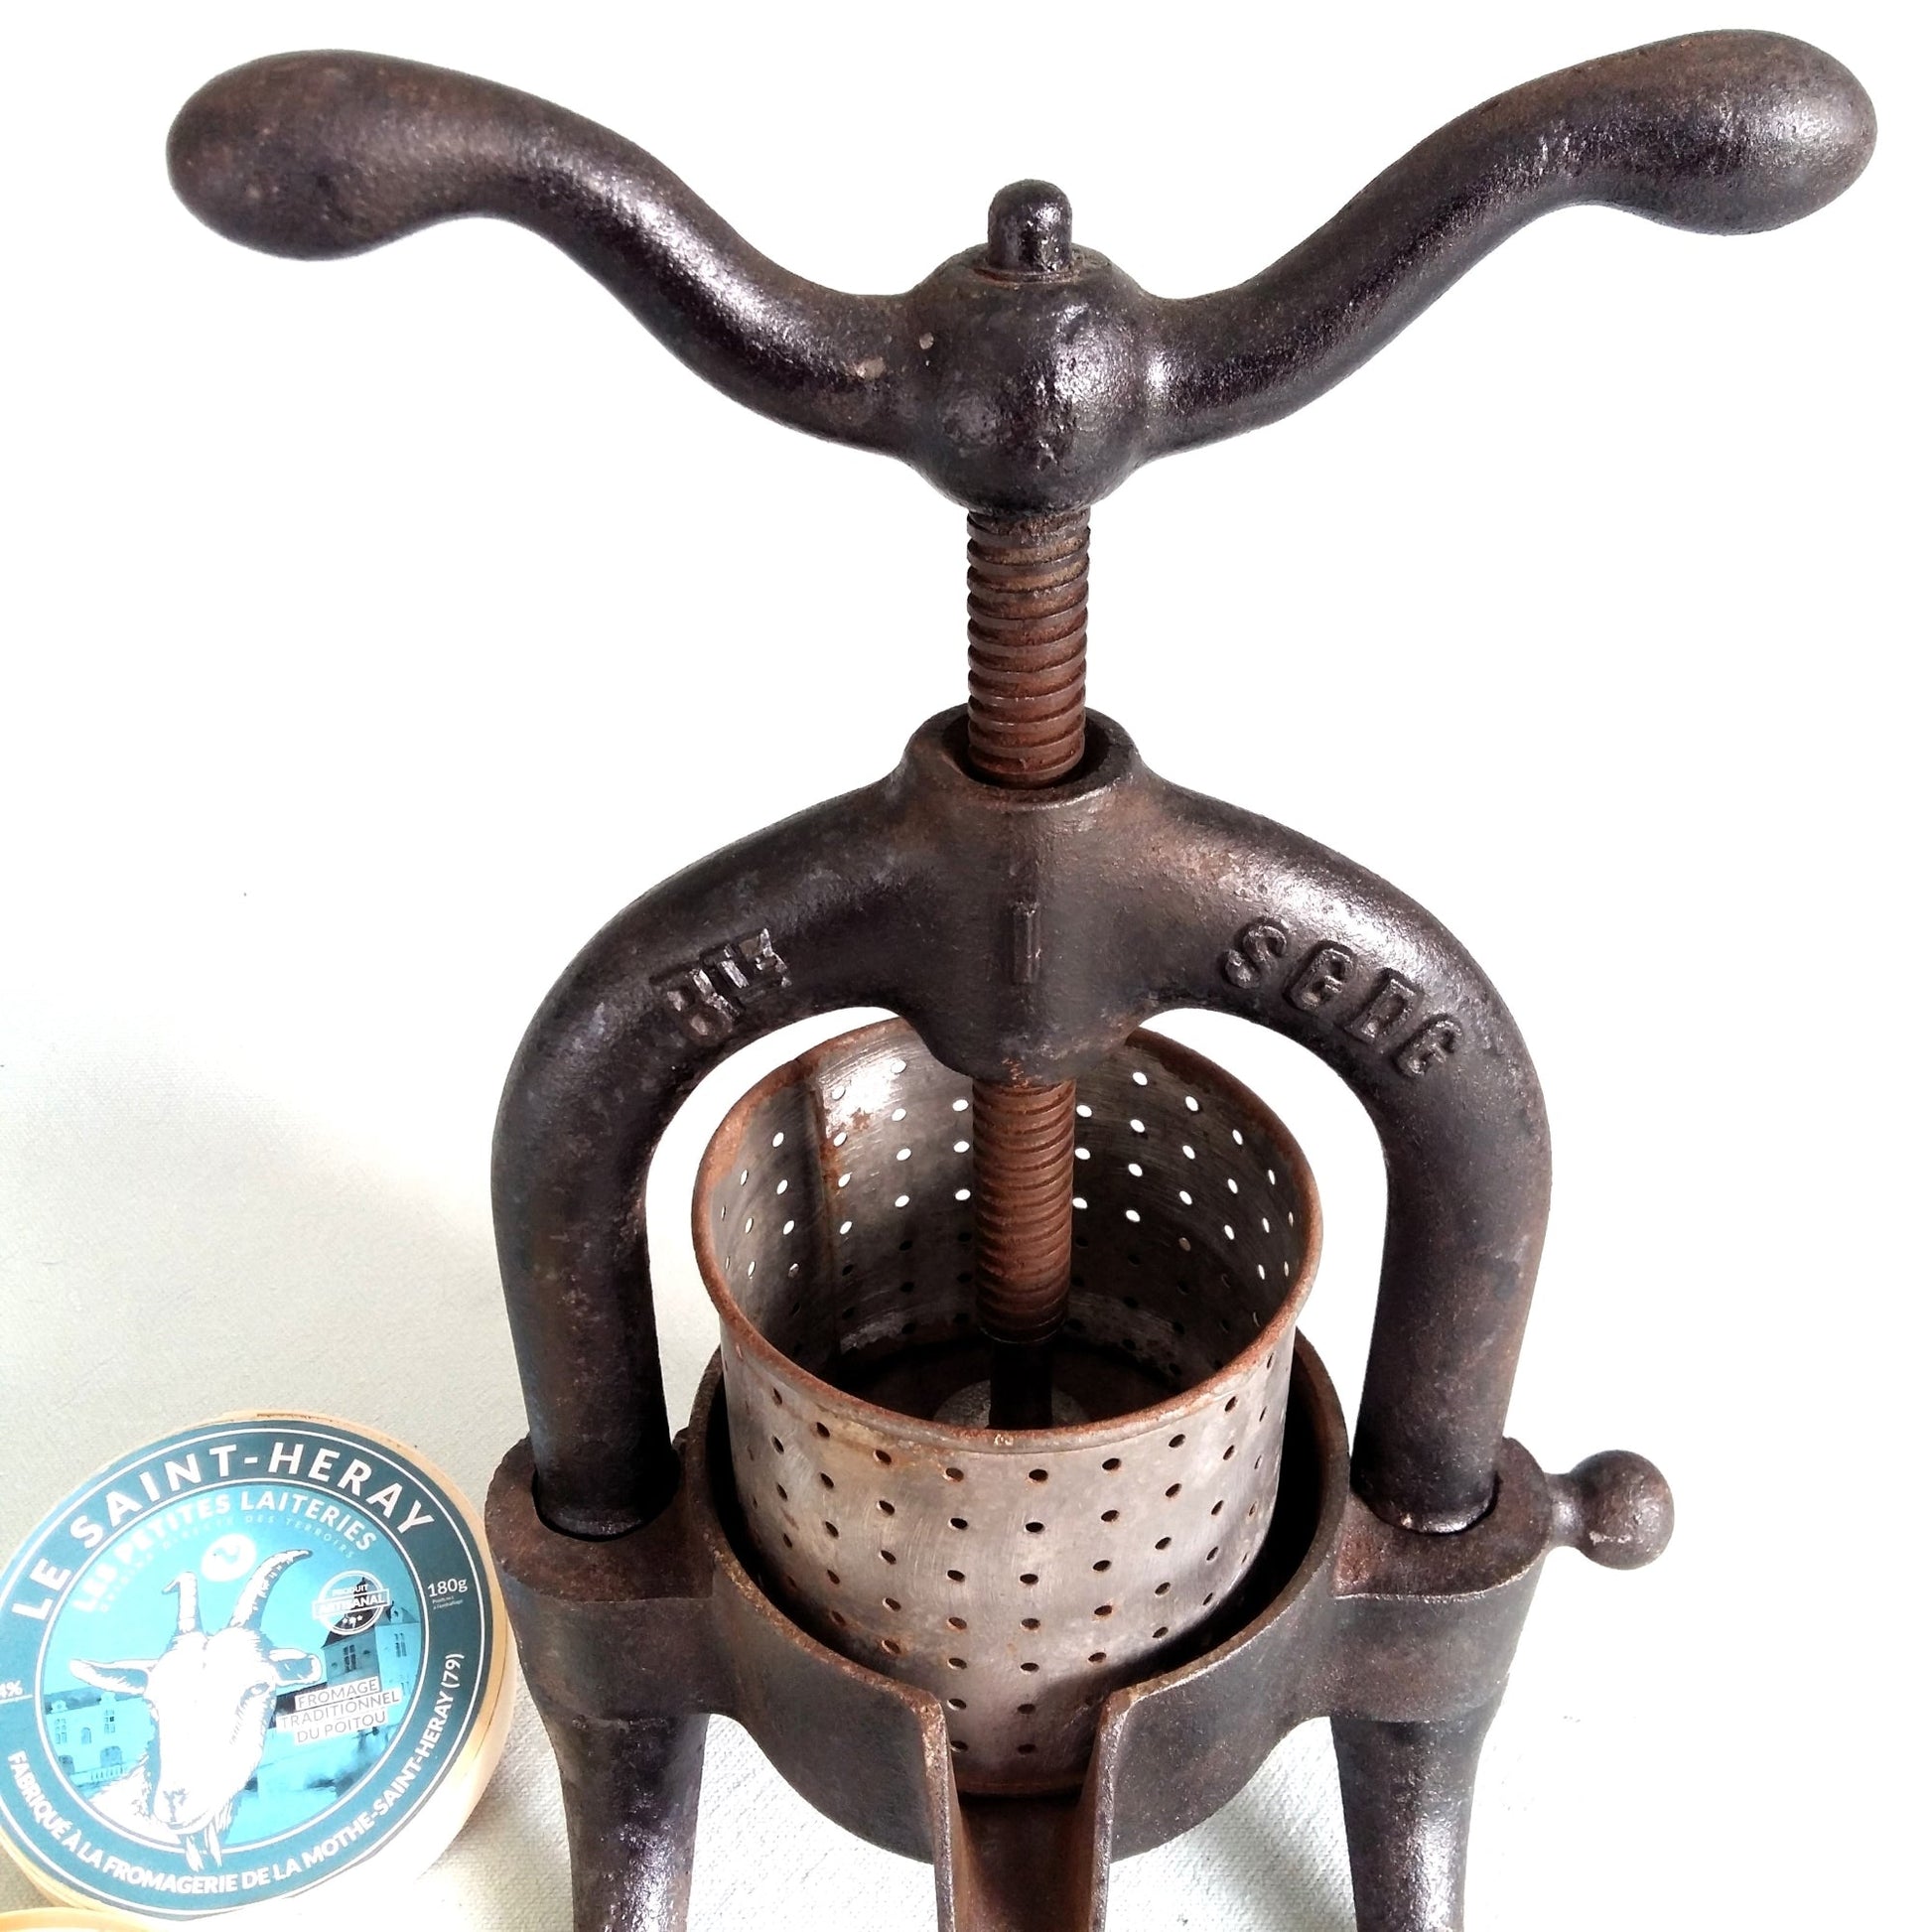 Antique French Cheese/Fruit Press by Tiggy and Pip. Only 345€ with FREE shipping.